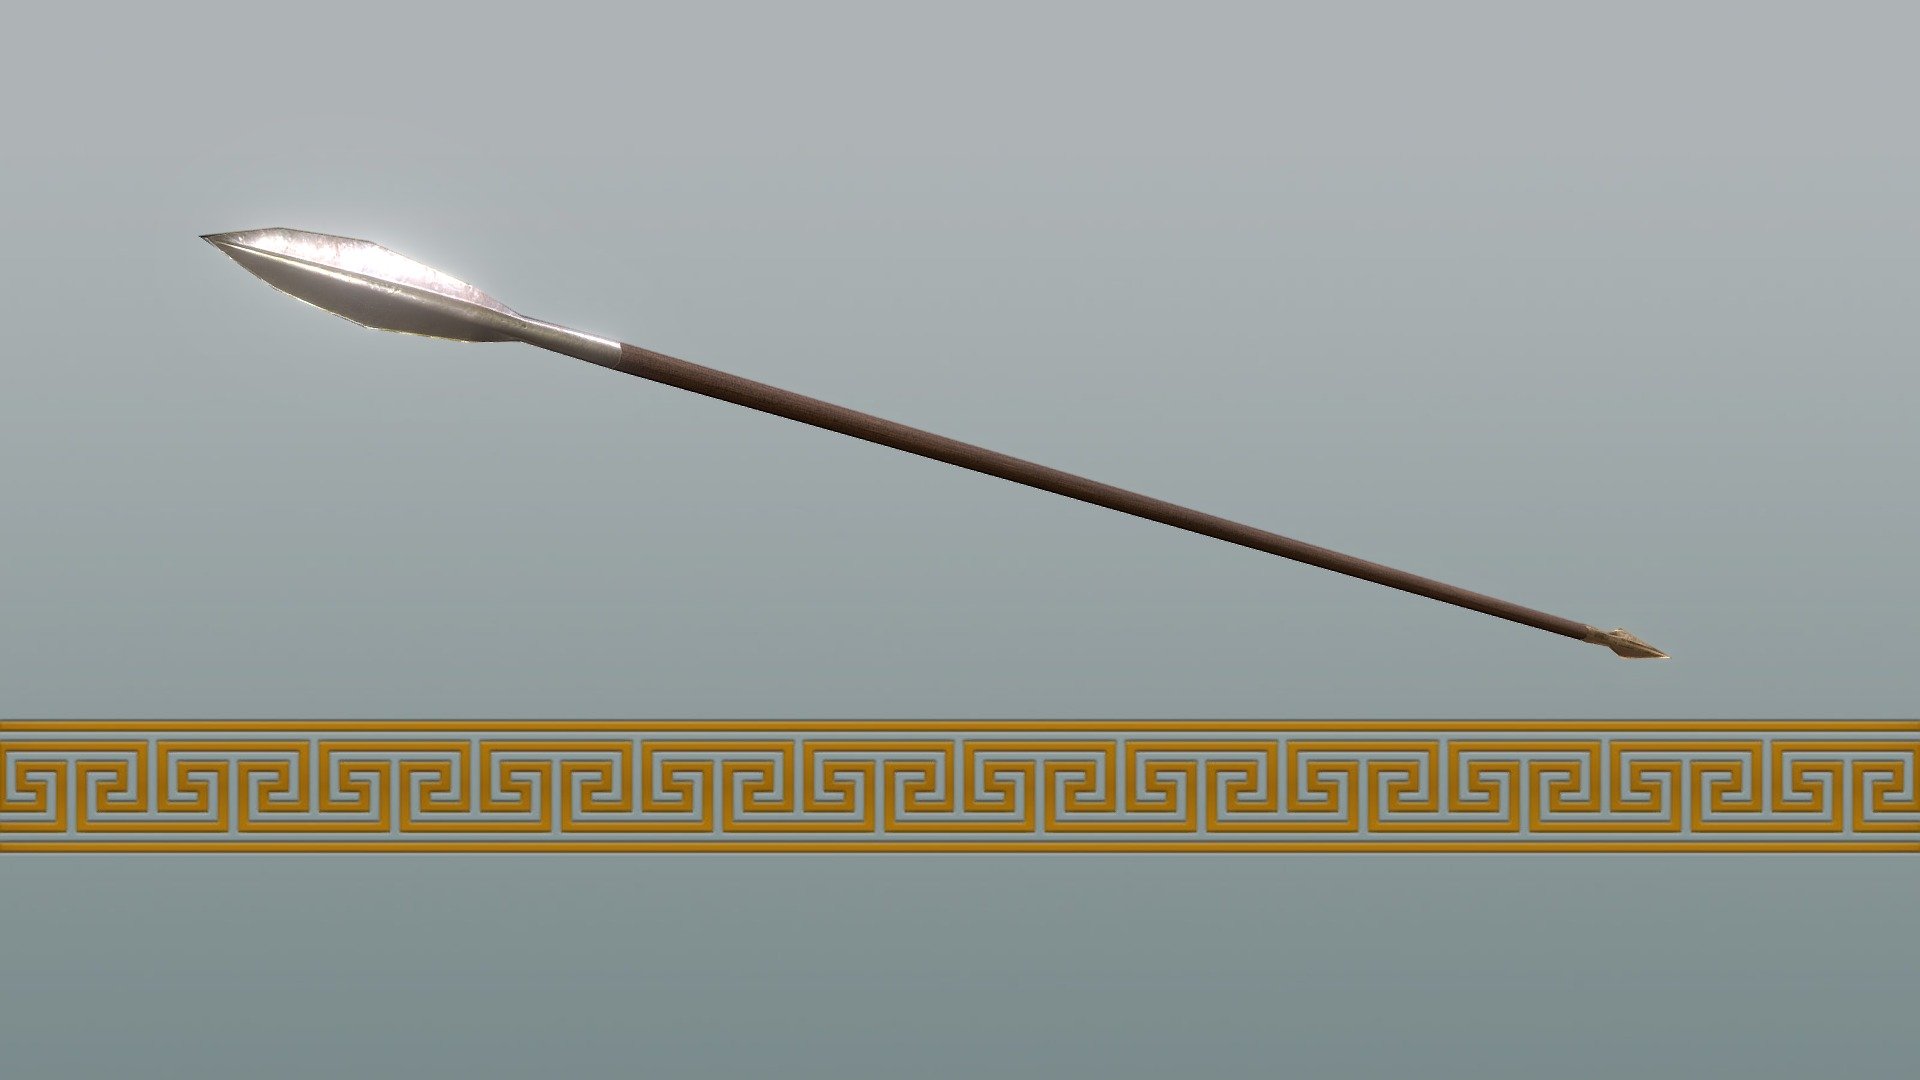 This is the spear used by an ancient Greek soldier. The head is made of iron, and the &ldquo;butt spike